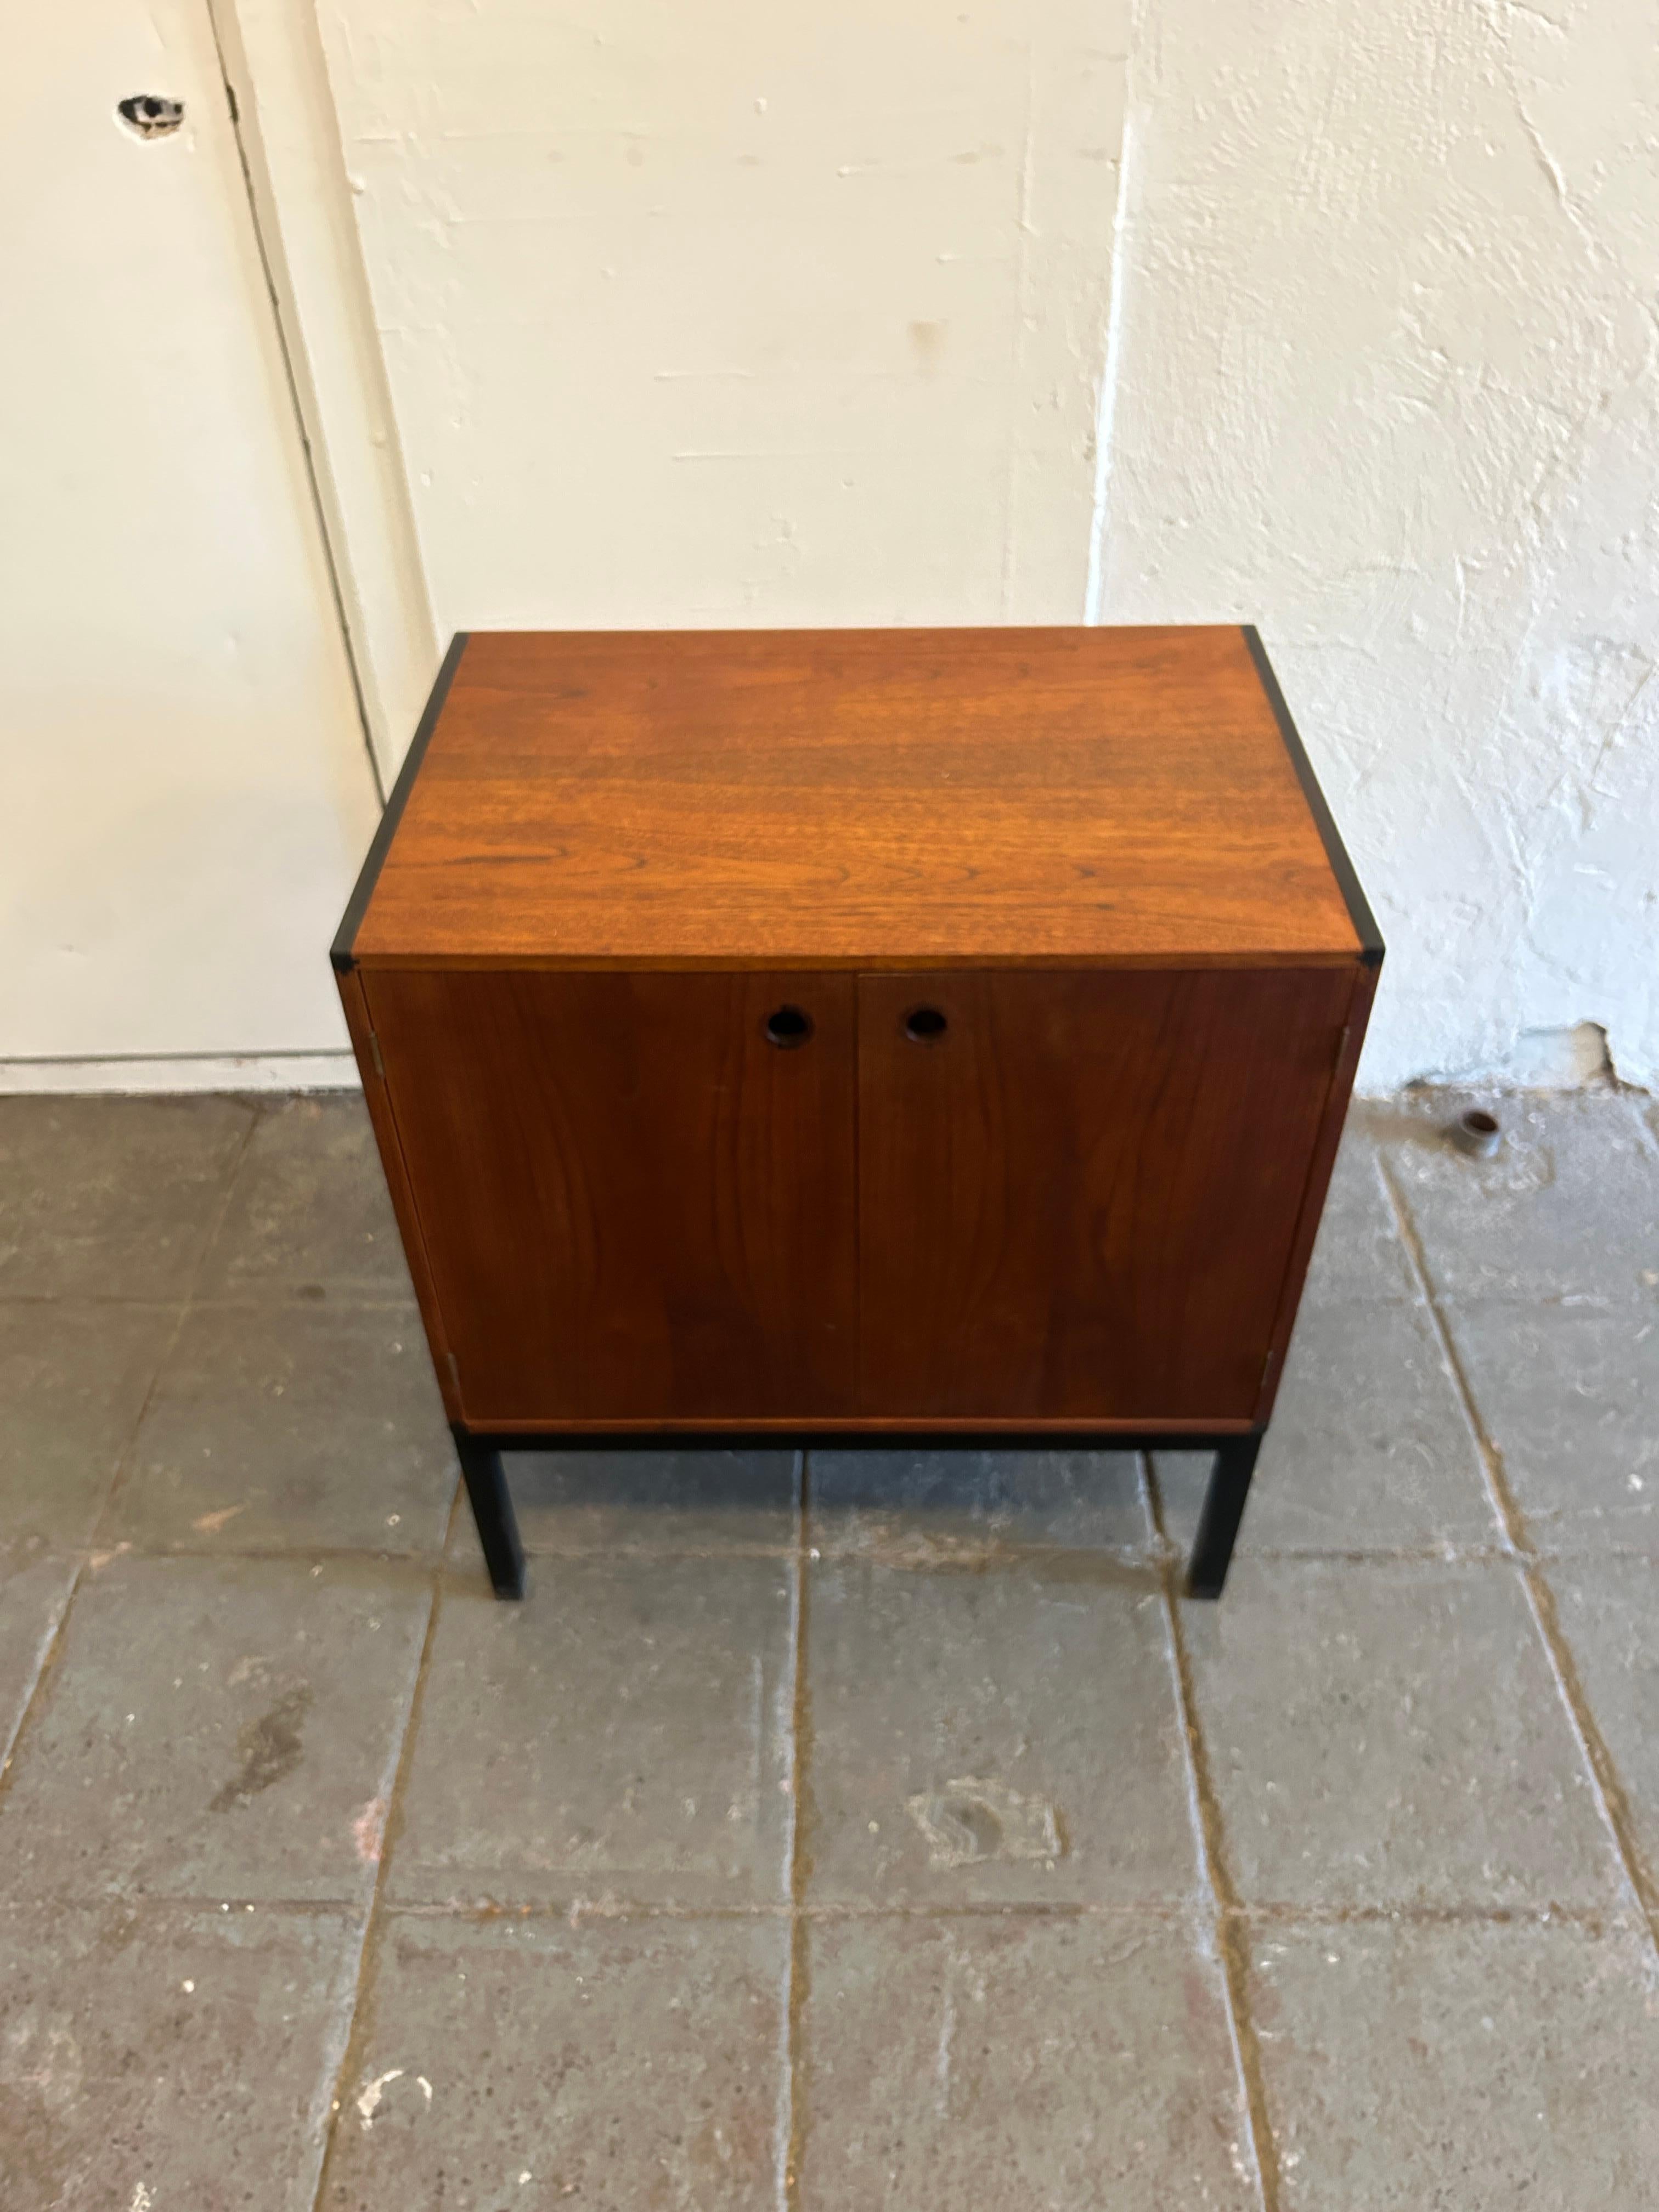 Scandinavian modern teak petite cabinet by Hans Hove & Palle Petersen by Christian Linneberg mobler. Teak construction with rosewood corners and small hole pulls with a black steel square tube frame and brass hinges. Good vintage condition. Has (1)